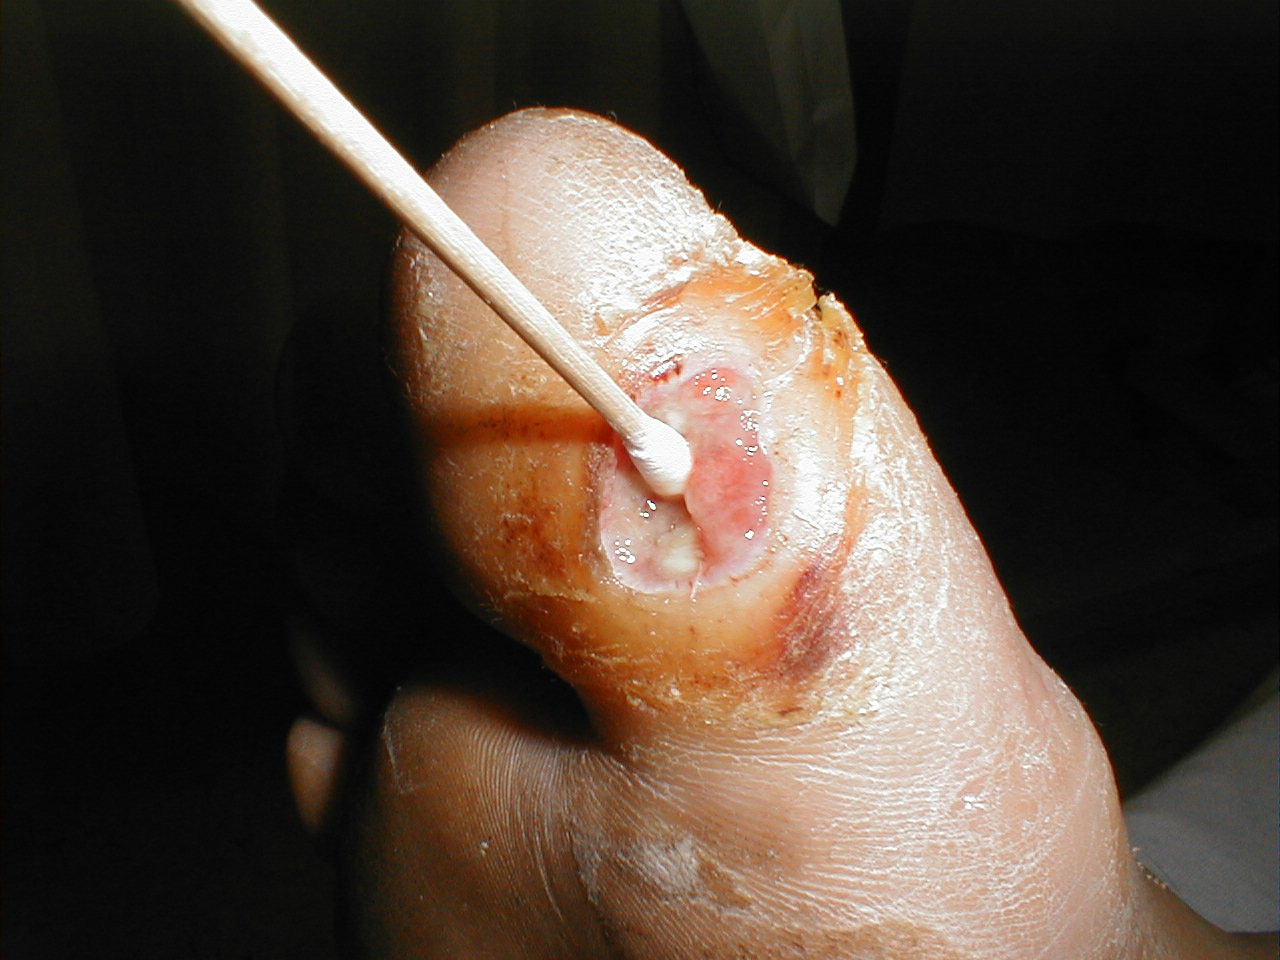 Clinical Osteomyelitis: Deep ulcer which permits passage of Q-tip to underlying level of bone